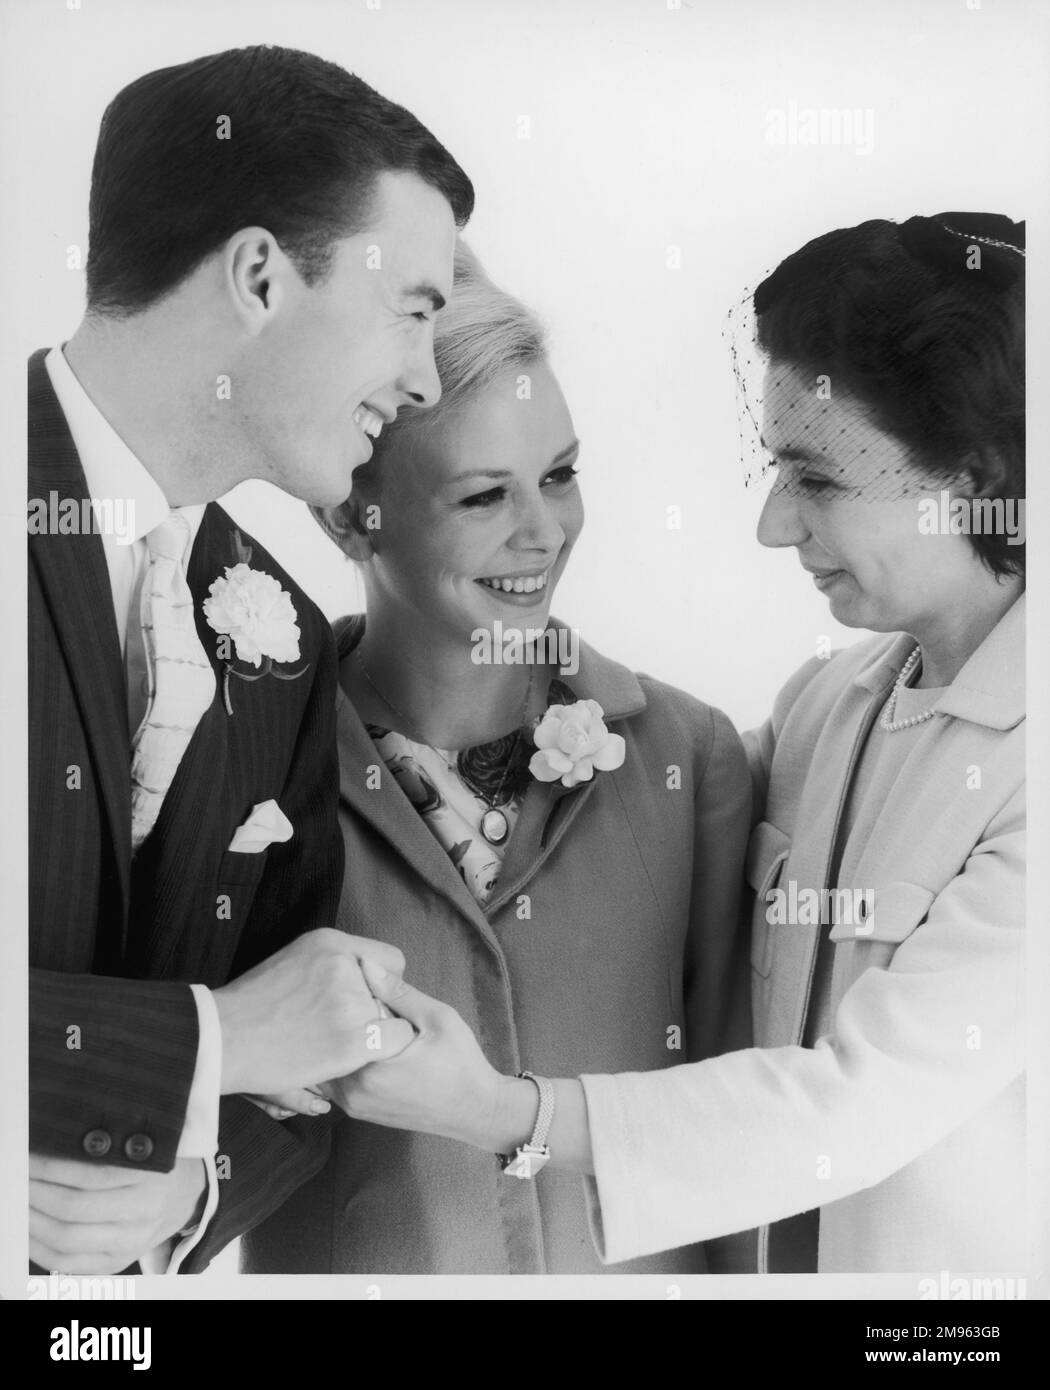 One of the wedding guests wishes the newlyweds well as they prepare to depart for their honeymoon. Stock Photo